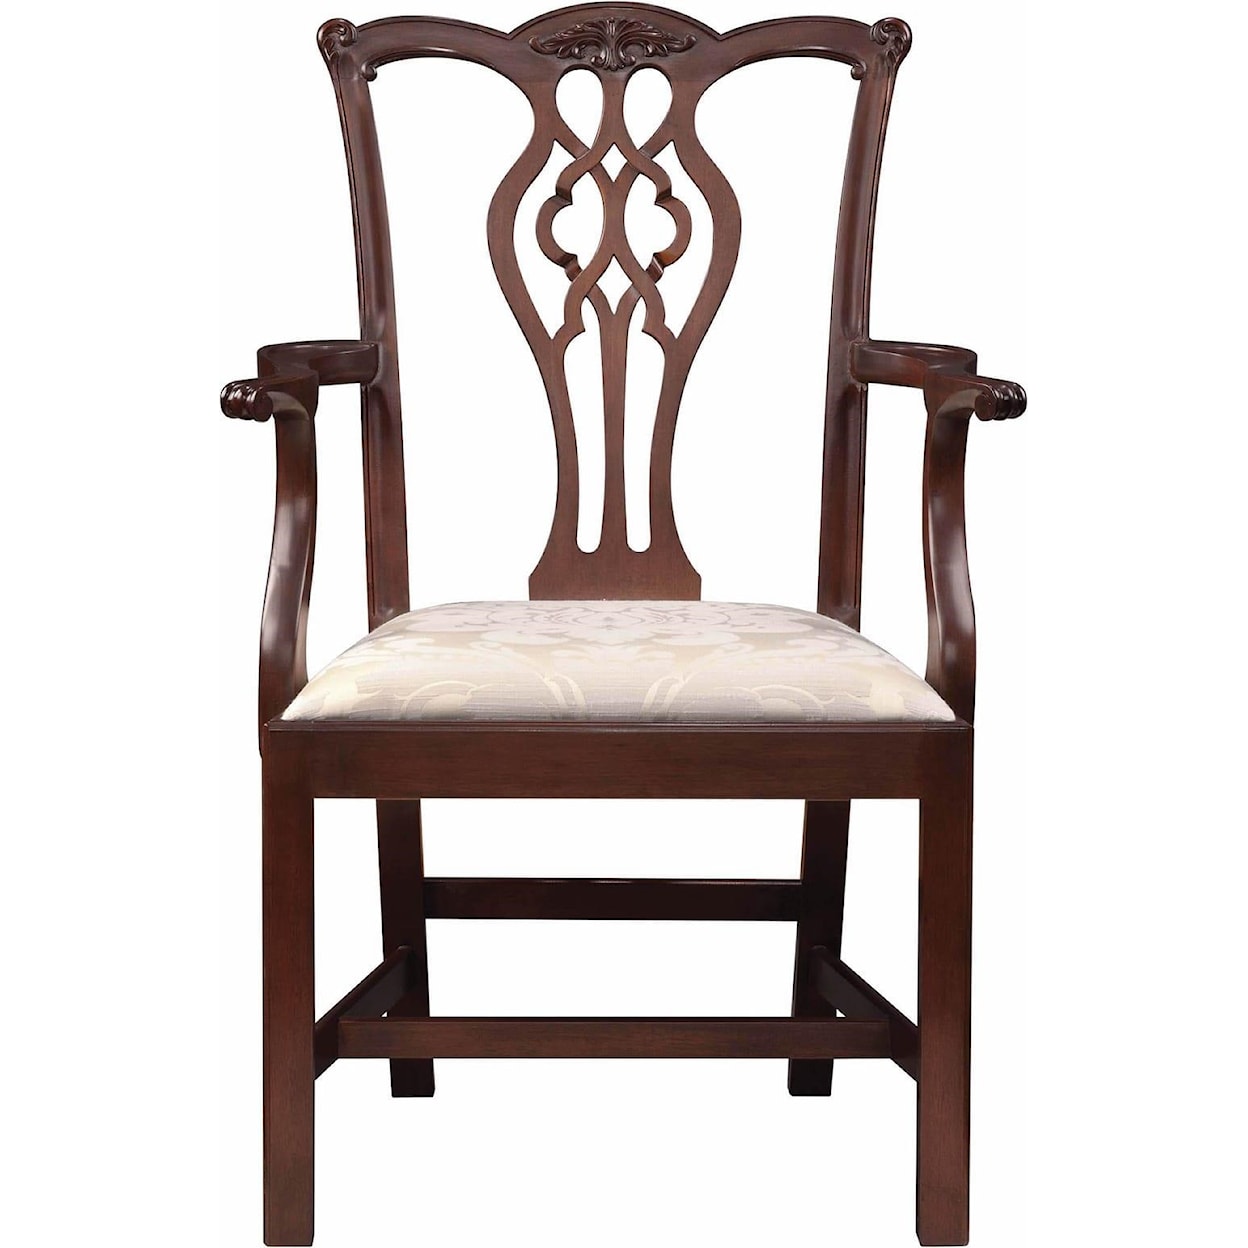 Stickley Classics Cherry and Mahogany Chippendale Arm Chair